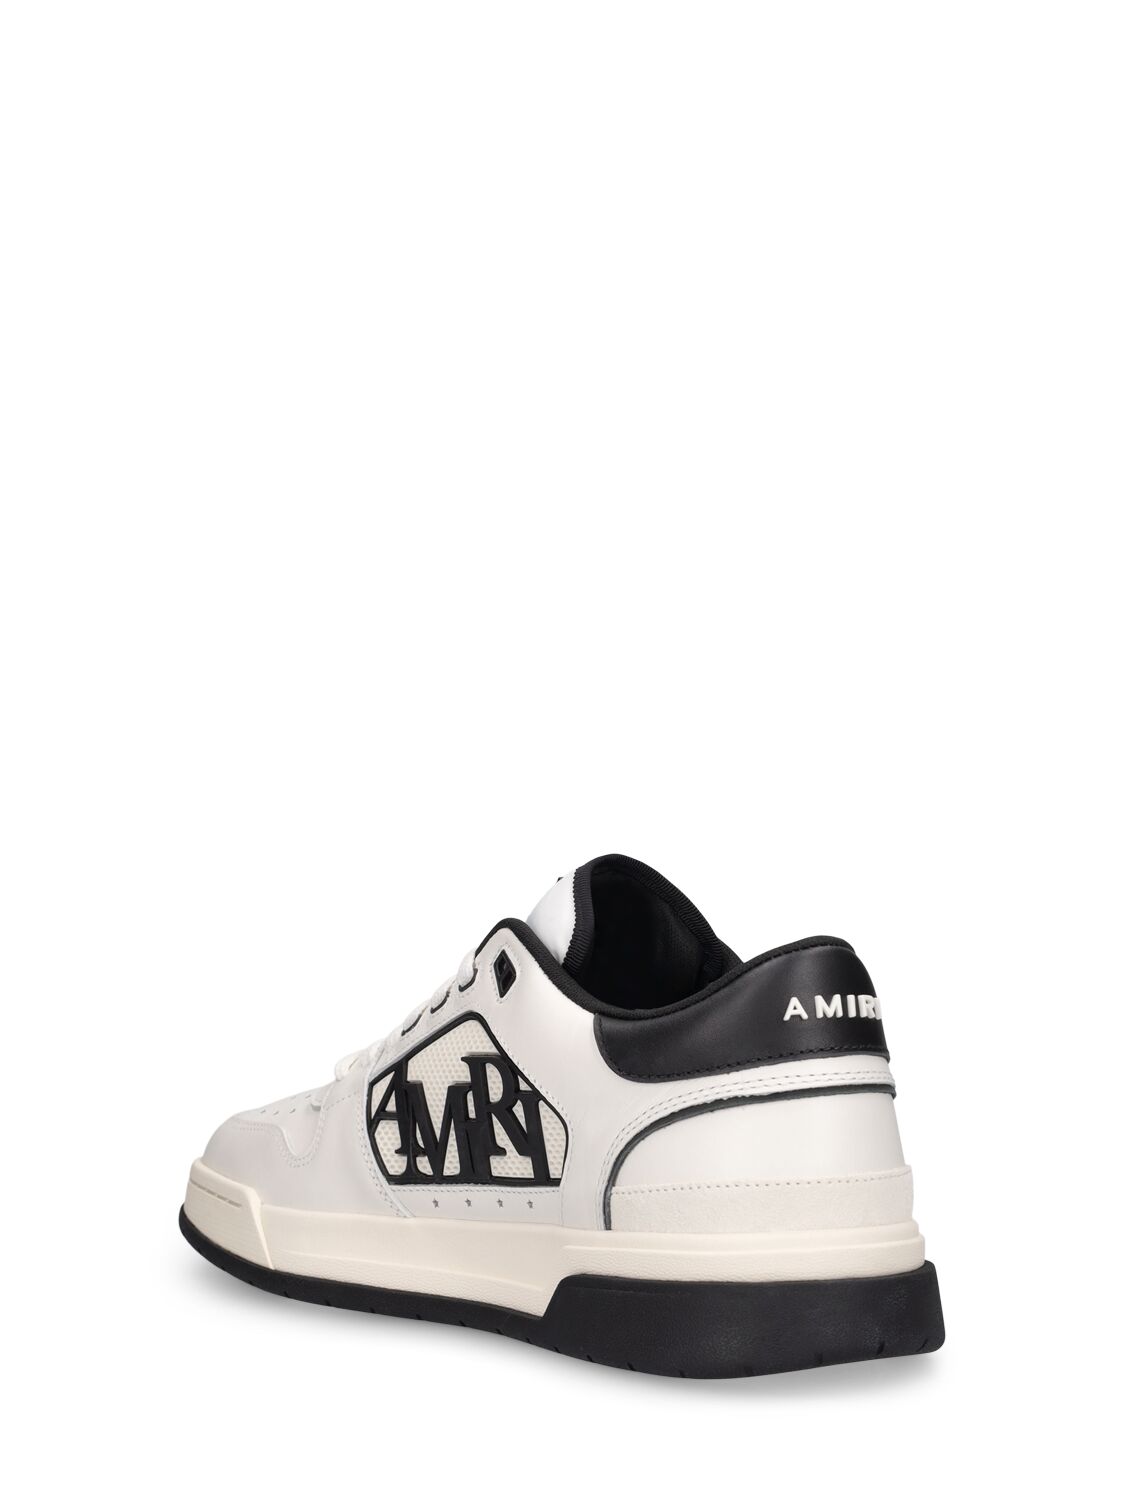 Shop Amiri Classic Leather Low Top Sneakers In White,black